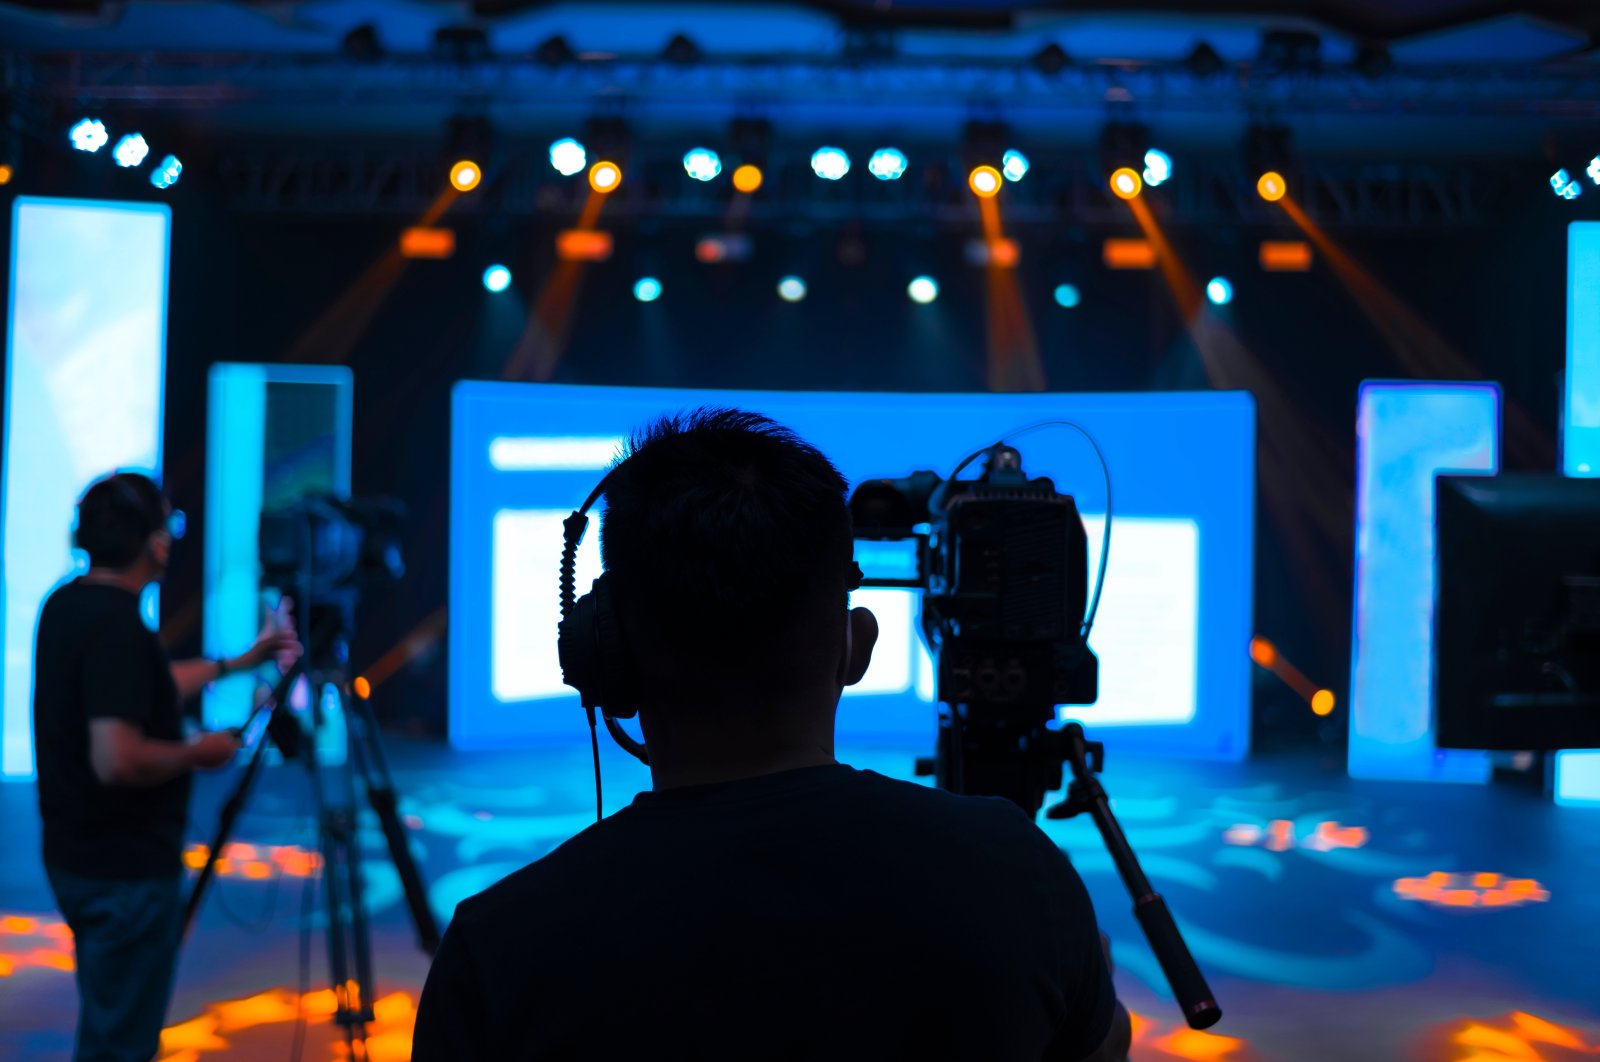 A camera operator covering an event on live studio news. (Shutterstock)